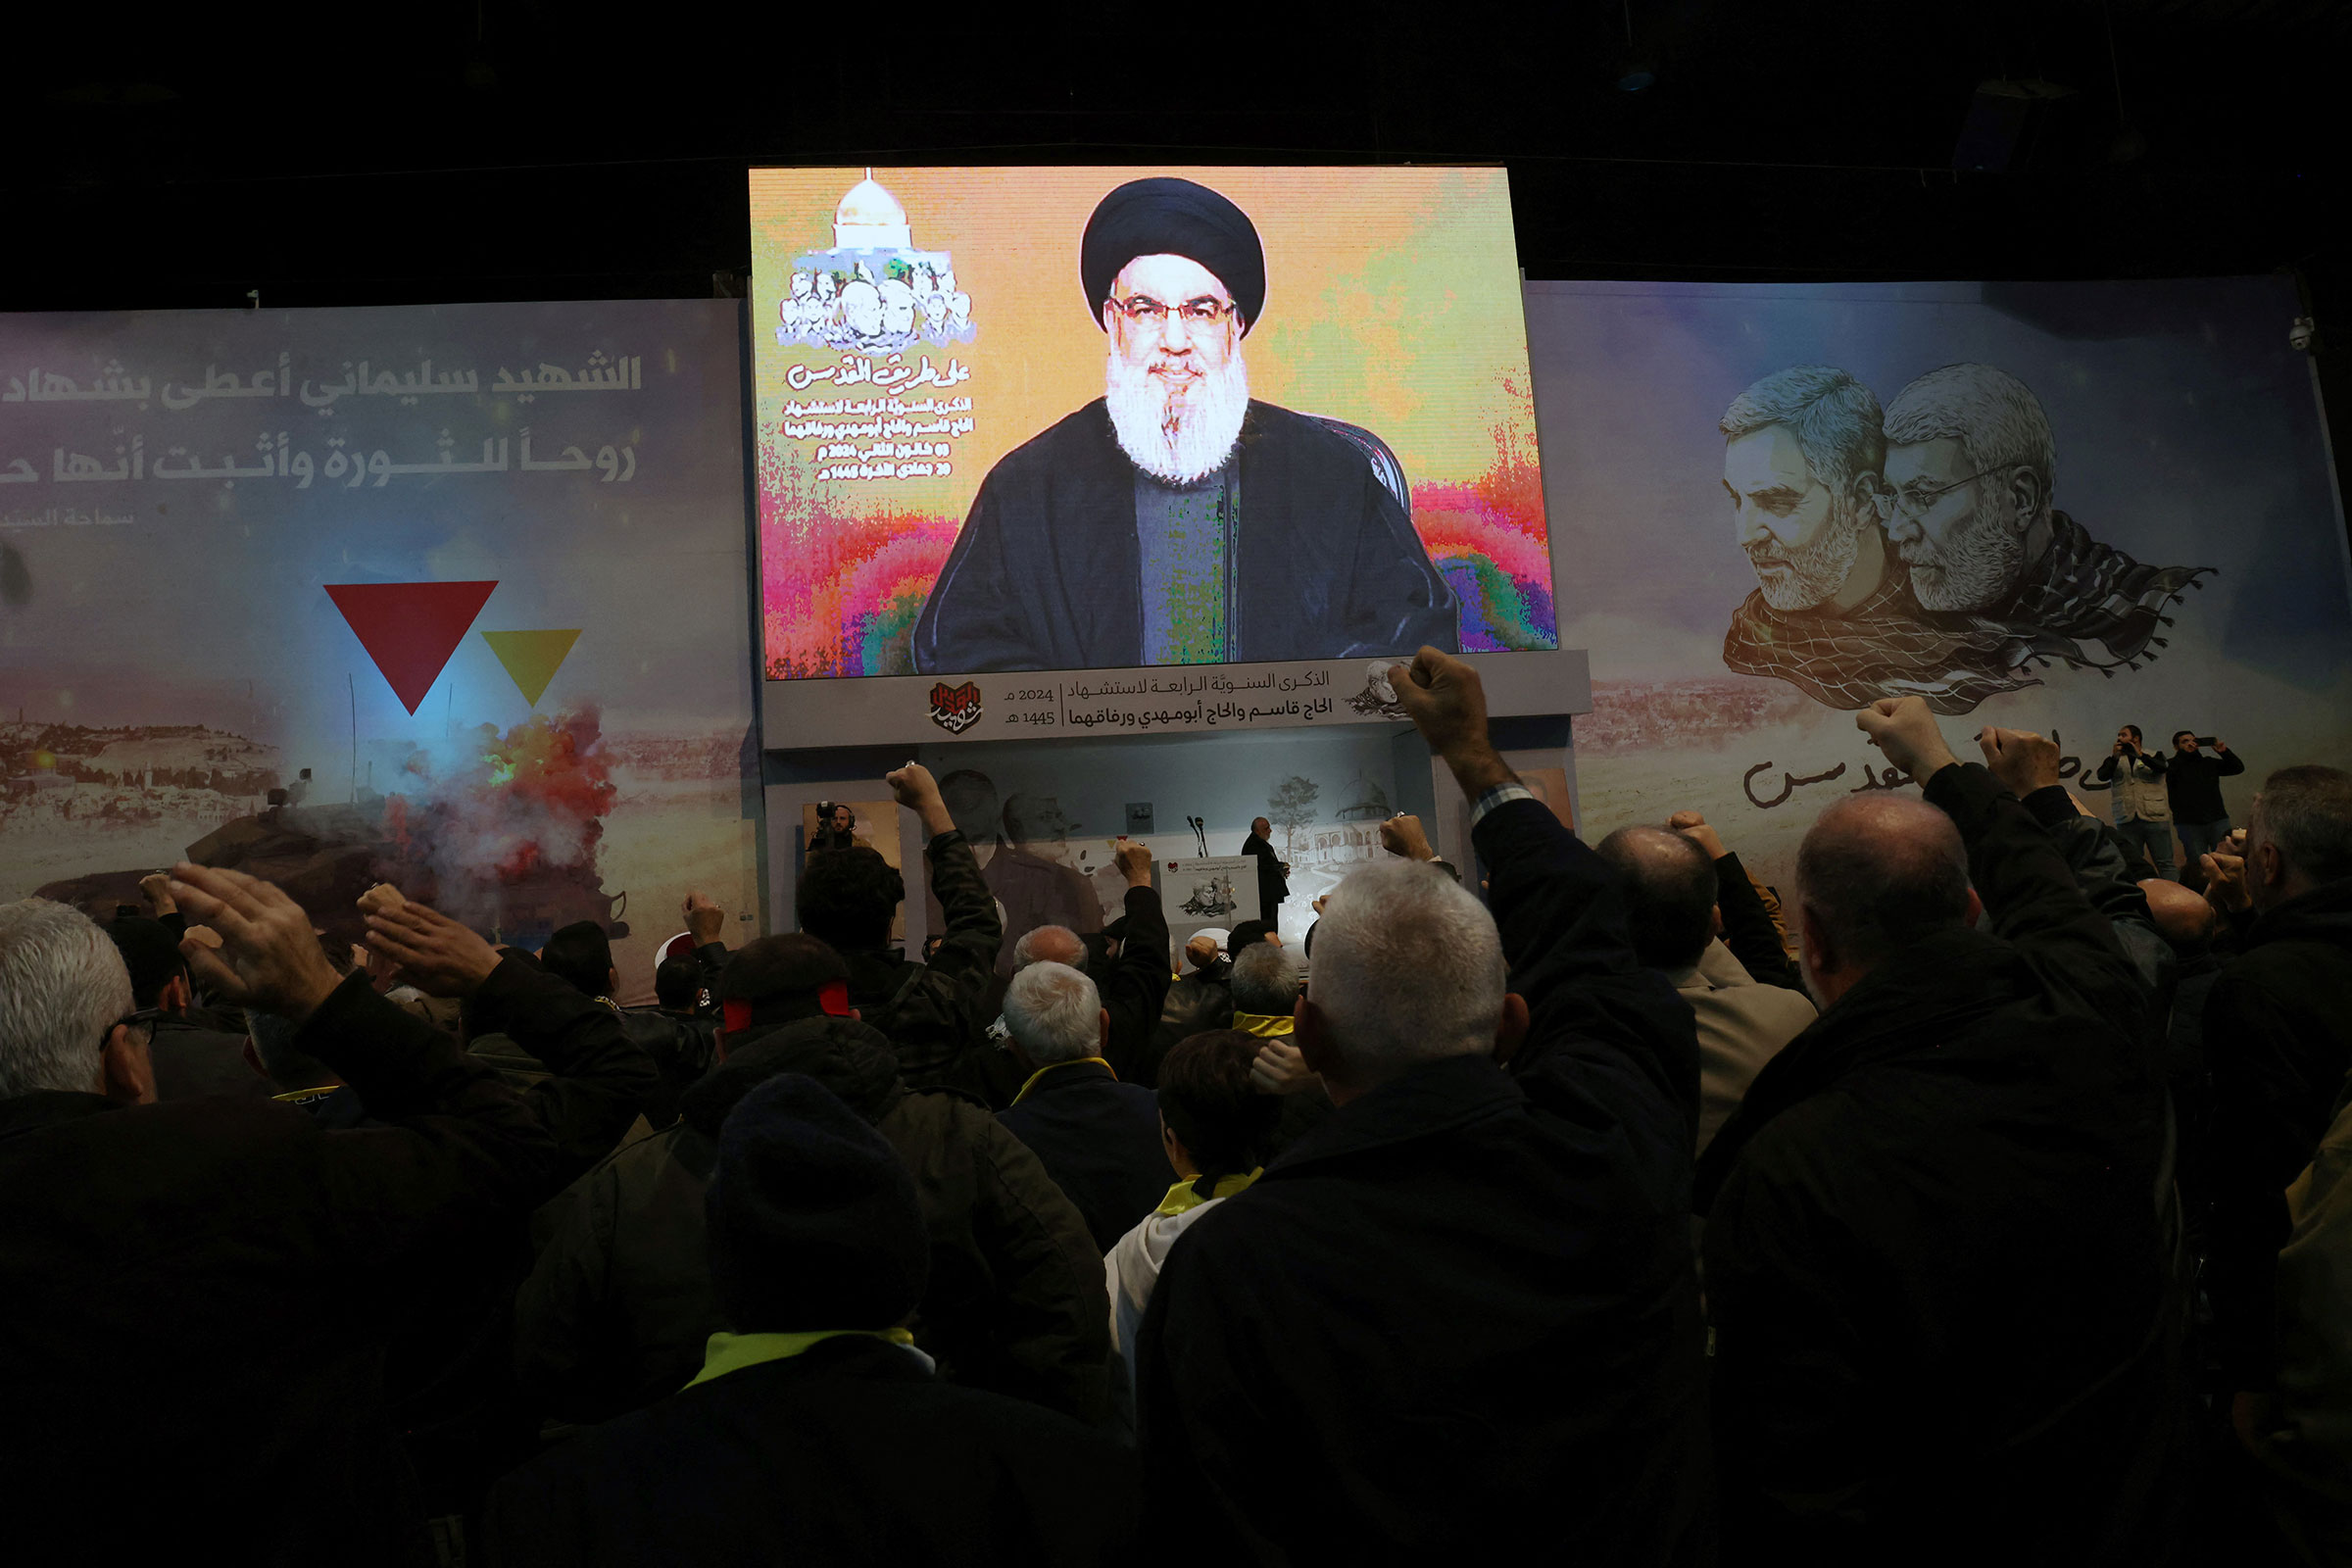 People watch the televised speech of Lebanon's Hezbollah chief Hassan Nasrallah to mark the anniversary of the killing of slain top Iranian commander Qasem Soleimani, in a Beirut's southern suburb on January 3.